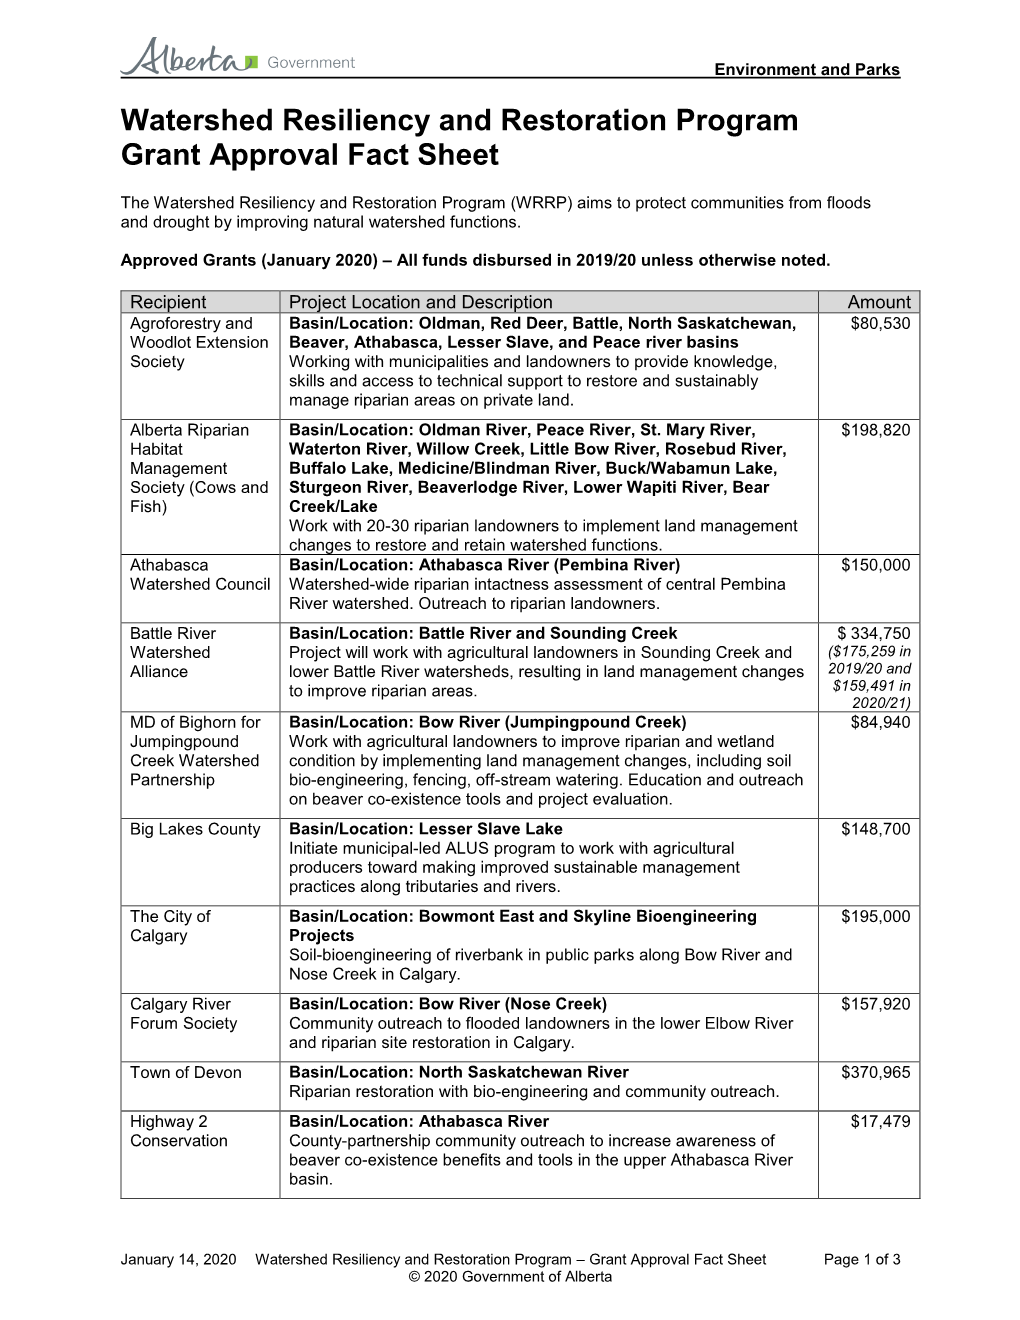 Watershed Resiliency and Restoration Program Grant Approval Fact Sheet